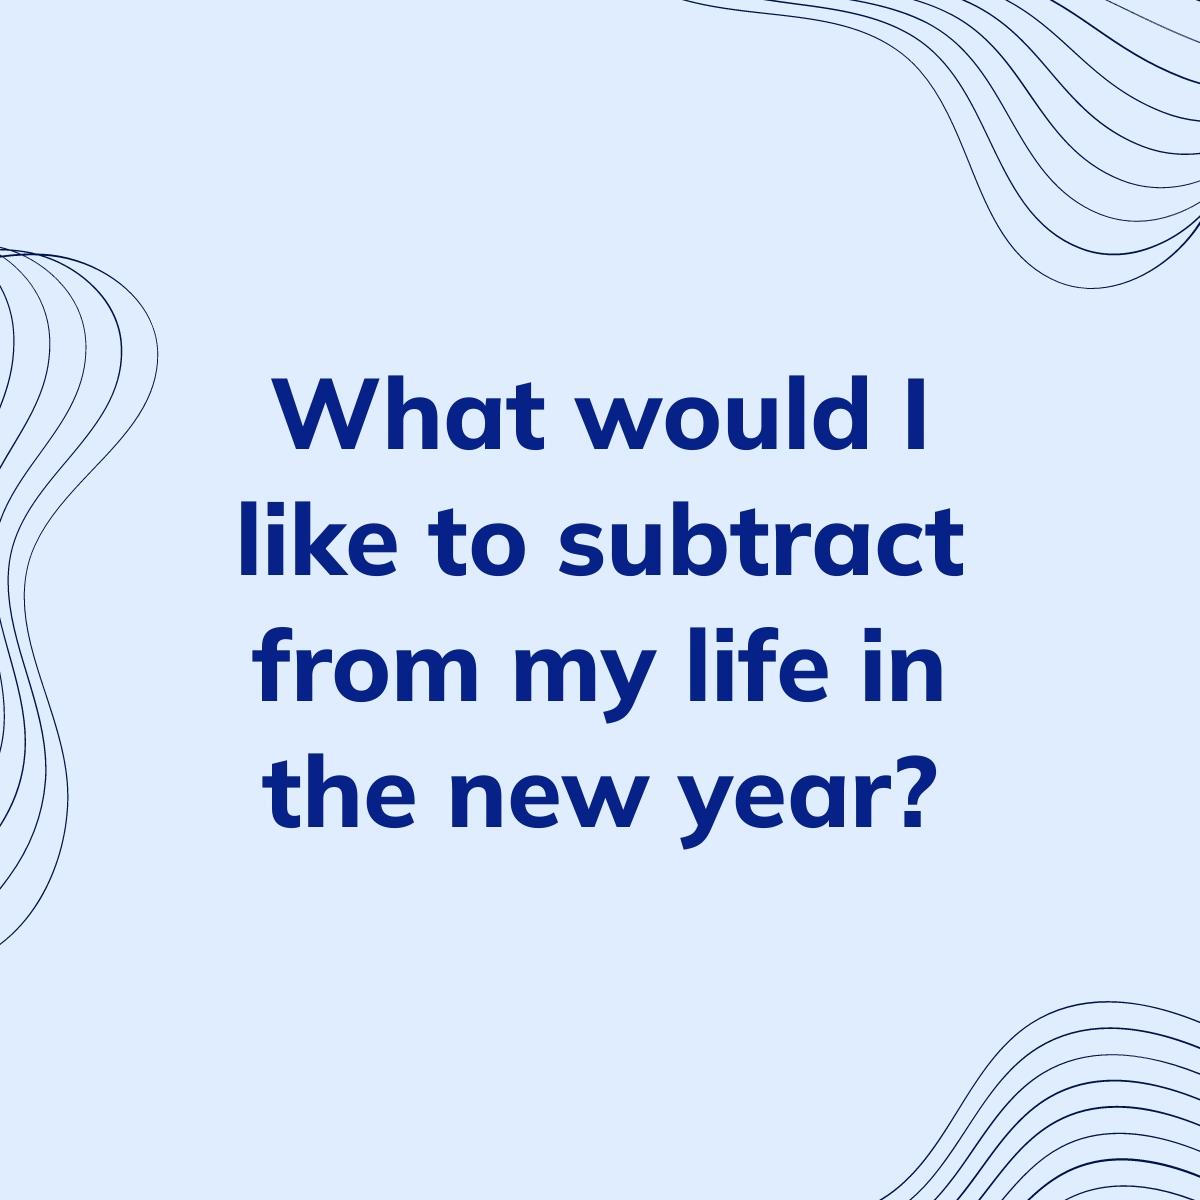 Journal Prompt: What would I like to subtract from my life in the new year?